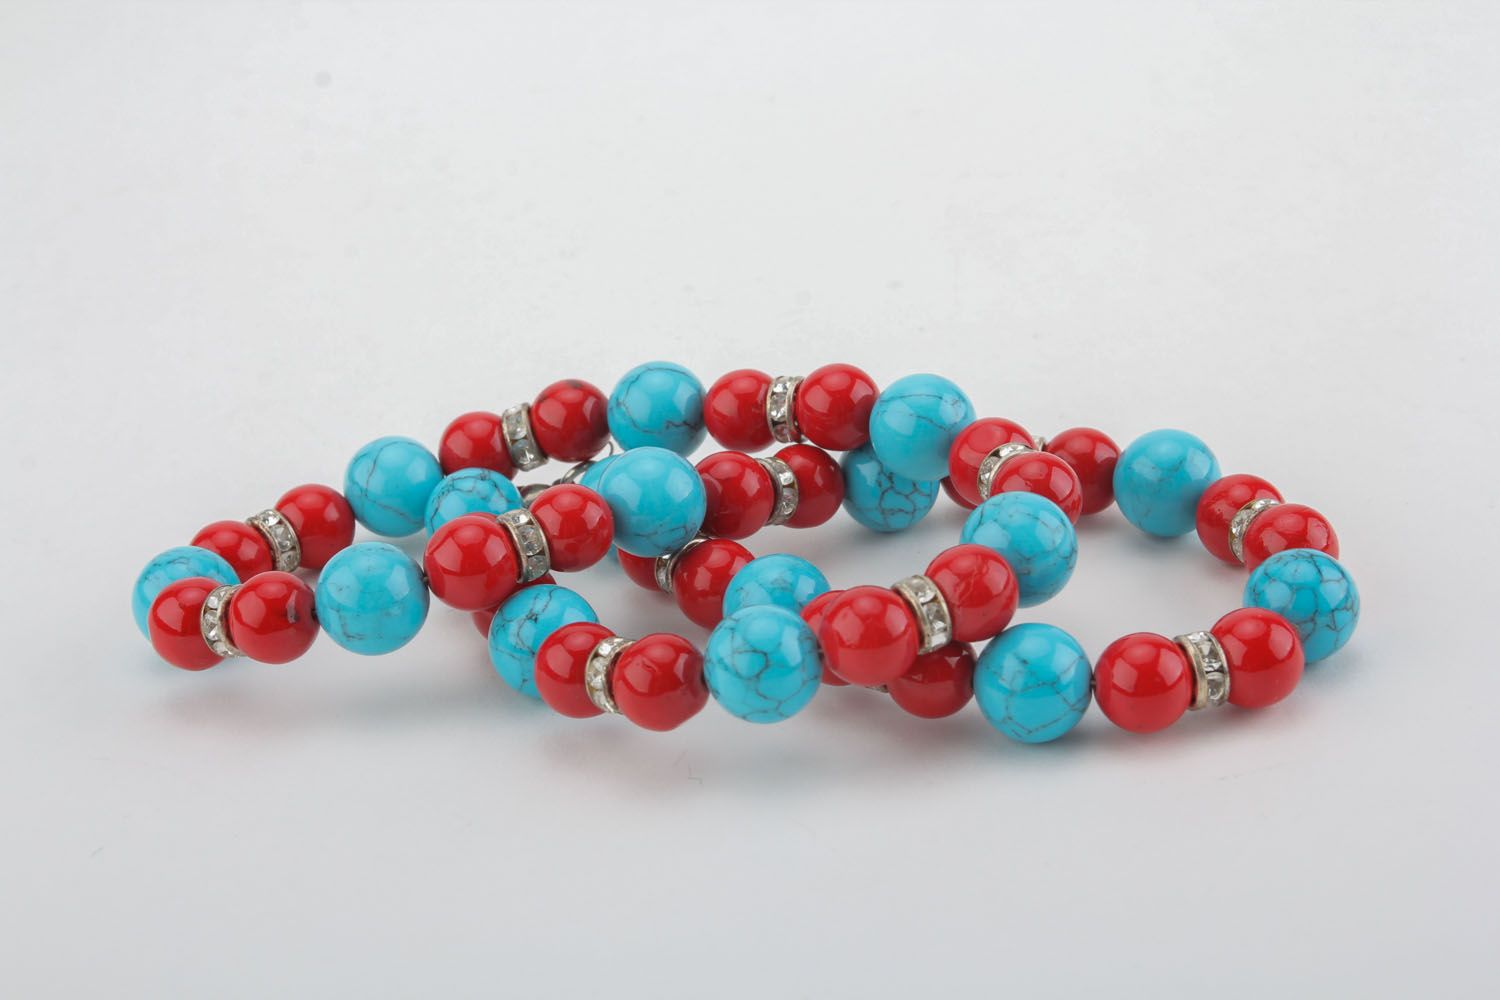 Necklace made of turquoise and coral photo 1